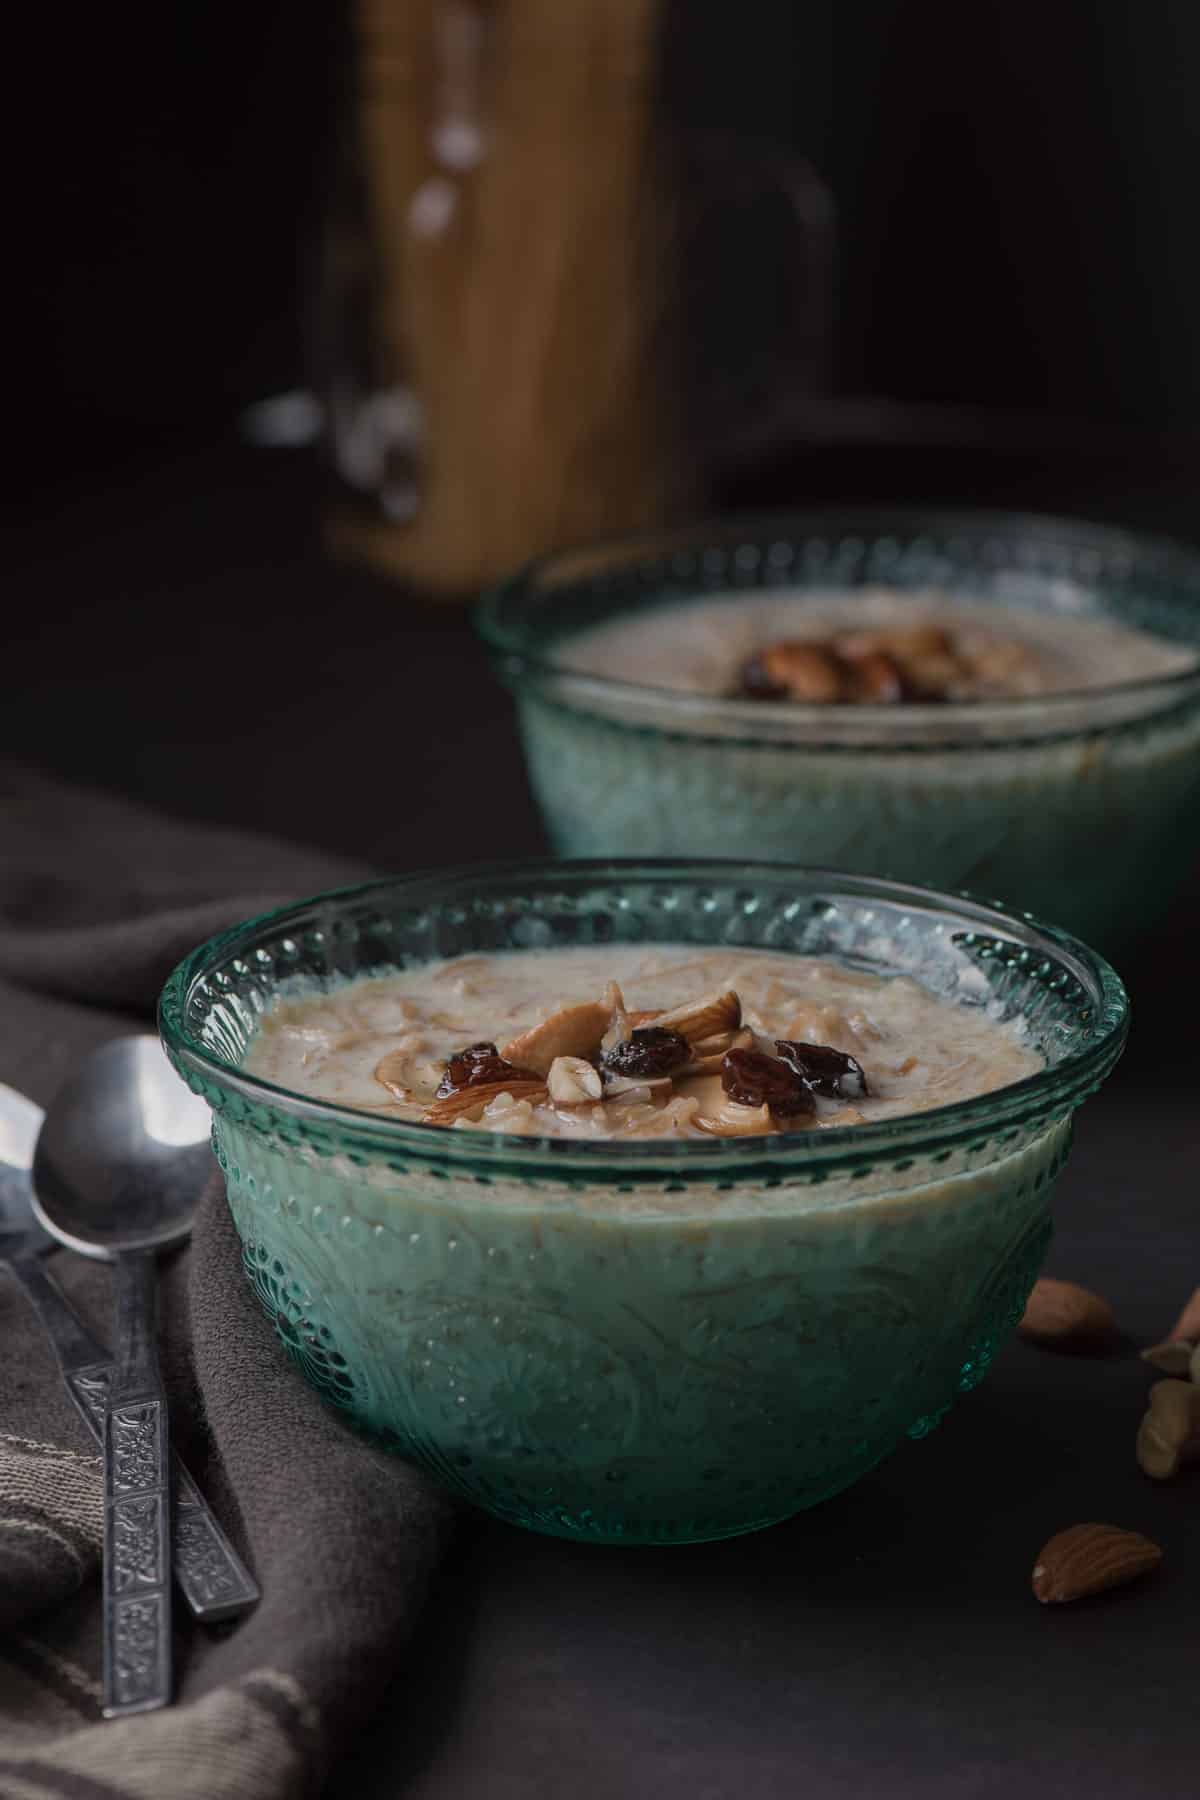 Semiyan payasam is a creamy and delicious dessert made from milk, sugar and vermicelli